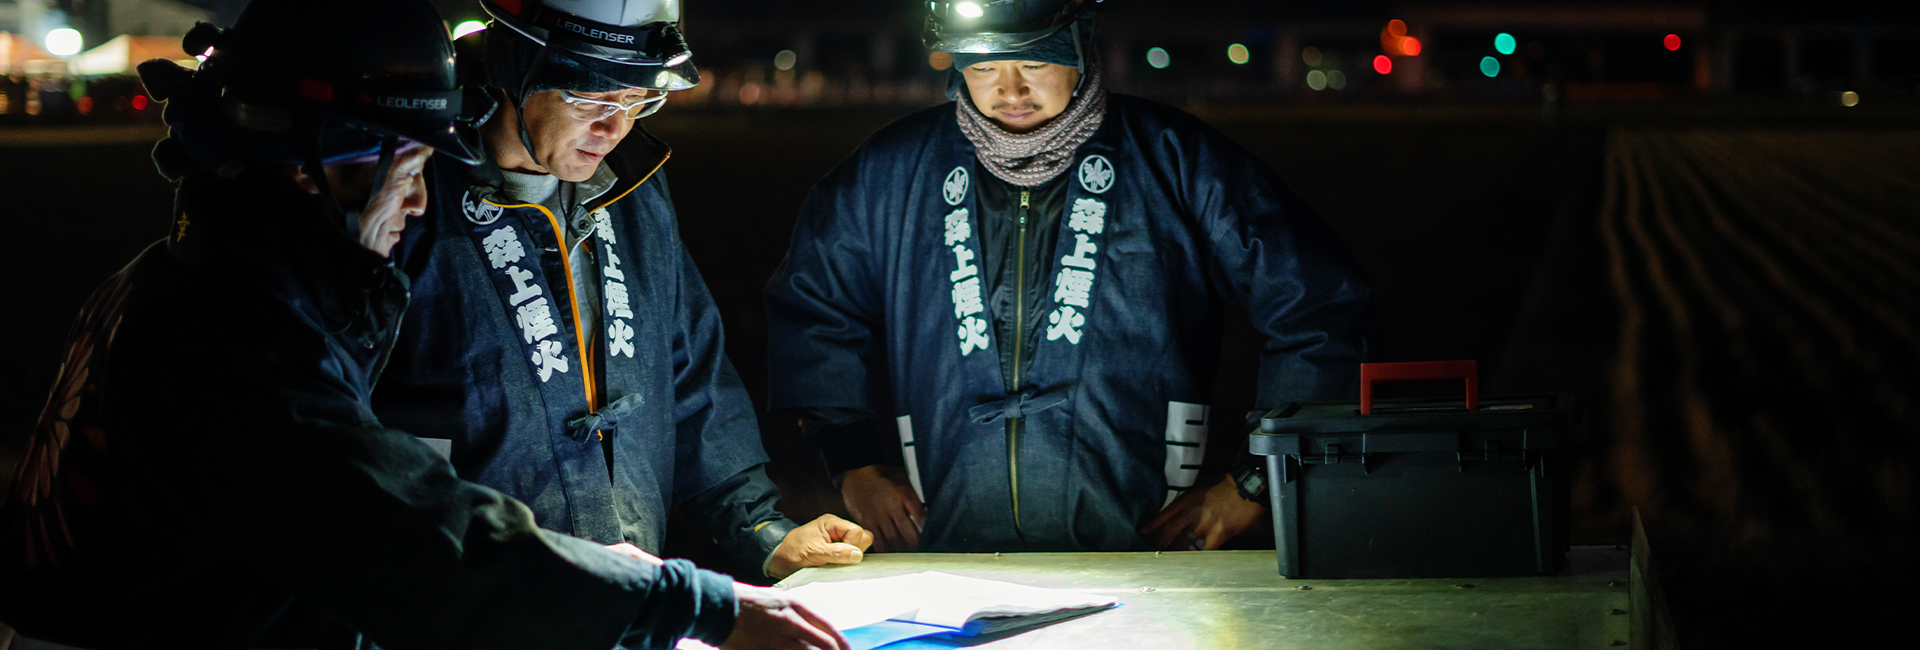 Three industry workers with headlamps